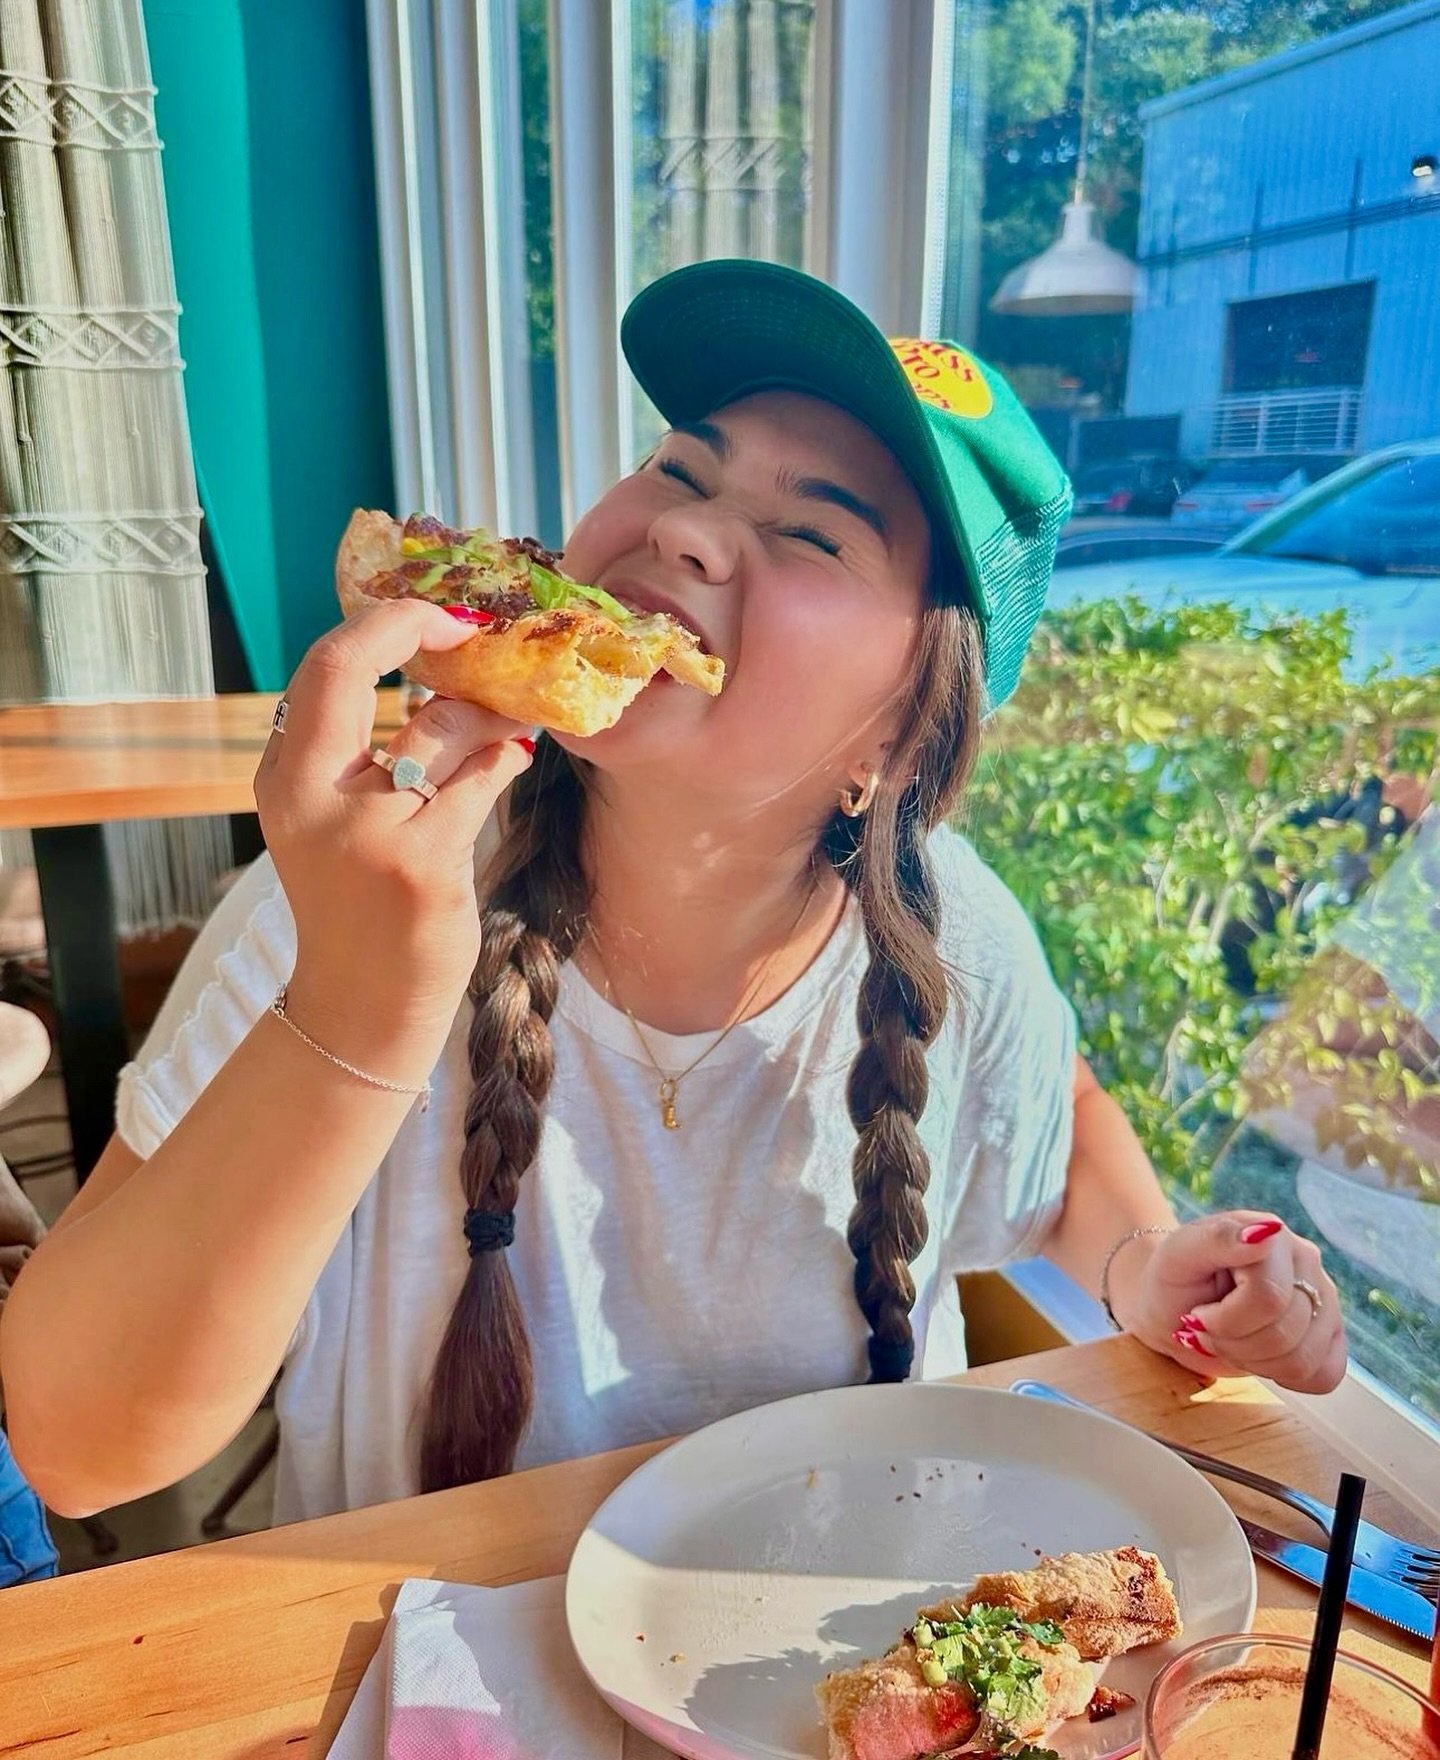 Eclipse this afternoon, so&hellip; what&rsquo;s the universe&rsquo;s encore for tonight? Happy Hour, obviously! Swing by for a pizza that&rsquo;s almost as stellar as the celestial show you&rsquo;ll witness.

📸 @audtrujillo